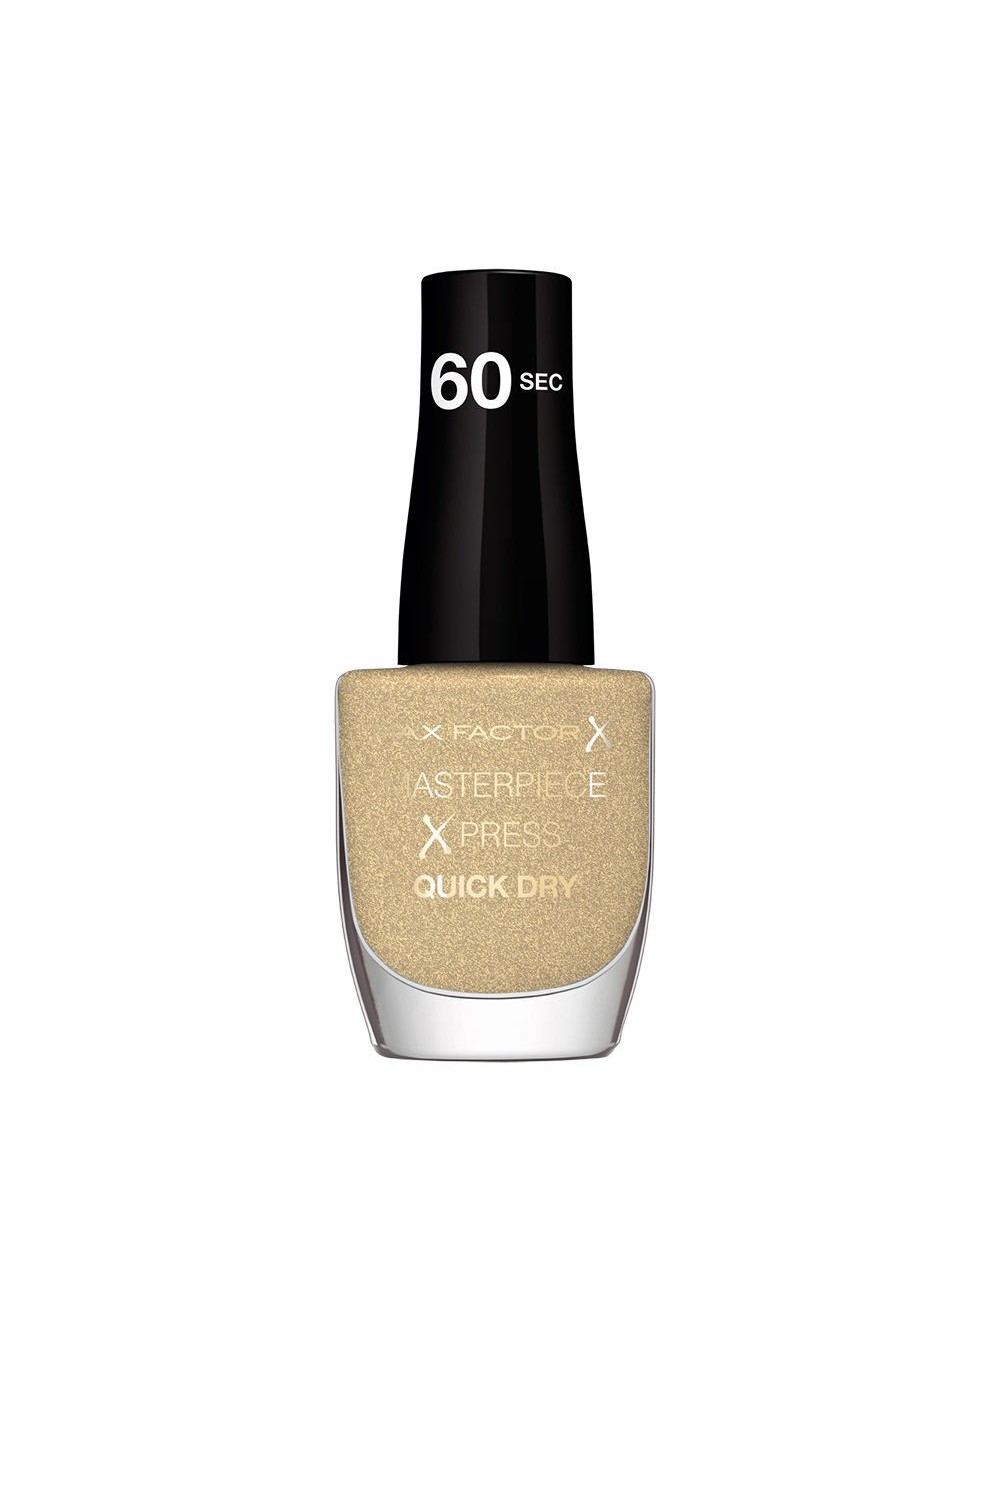 Max Factor Masterpiece Xpress Quick Dry 700-Champagne Kisses